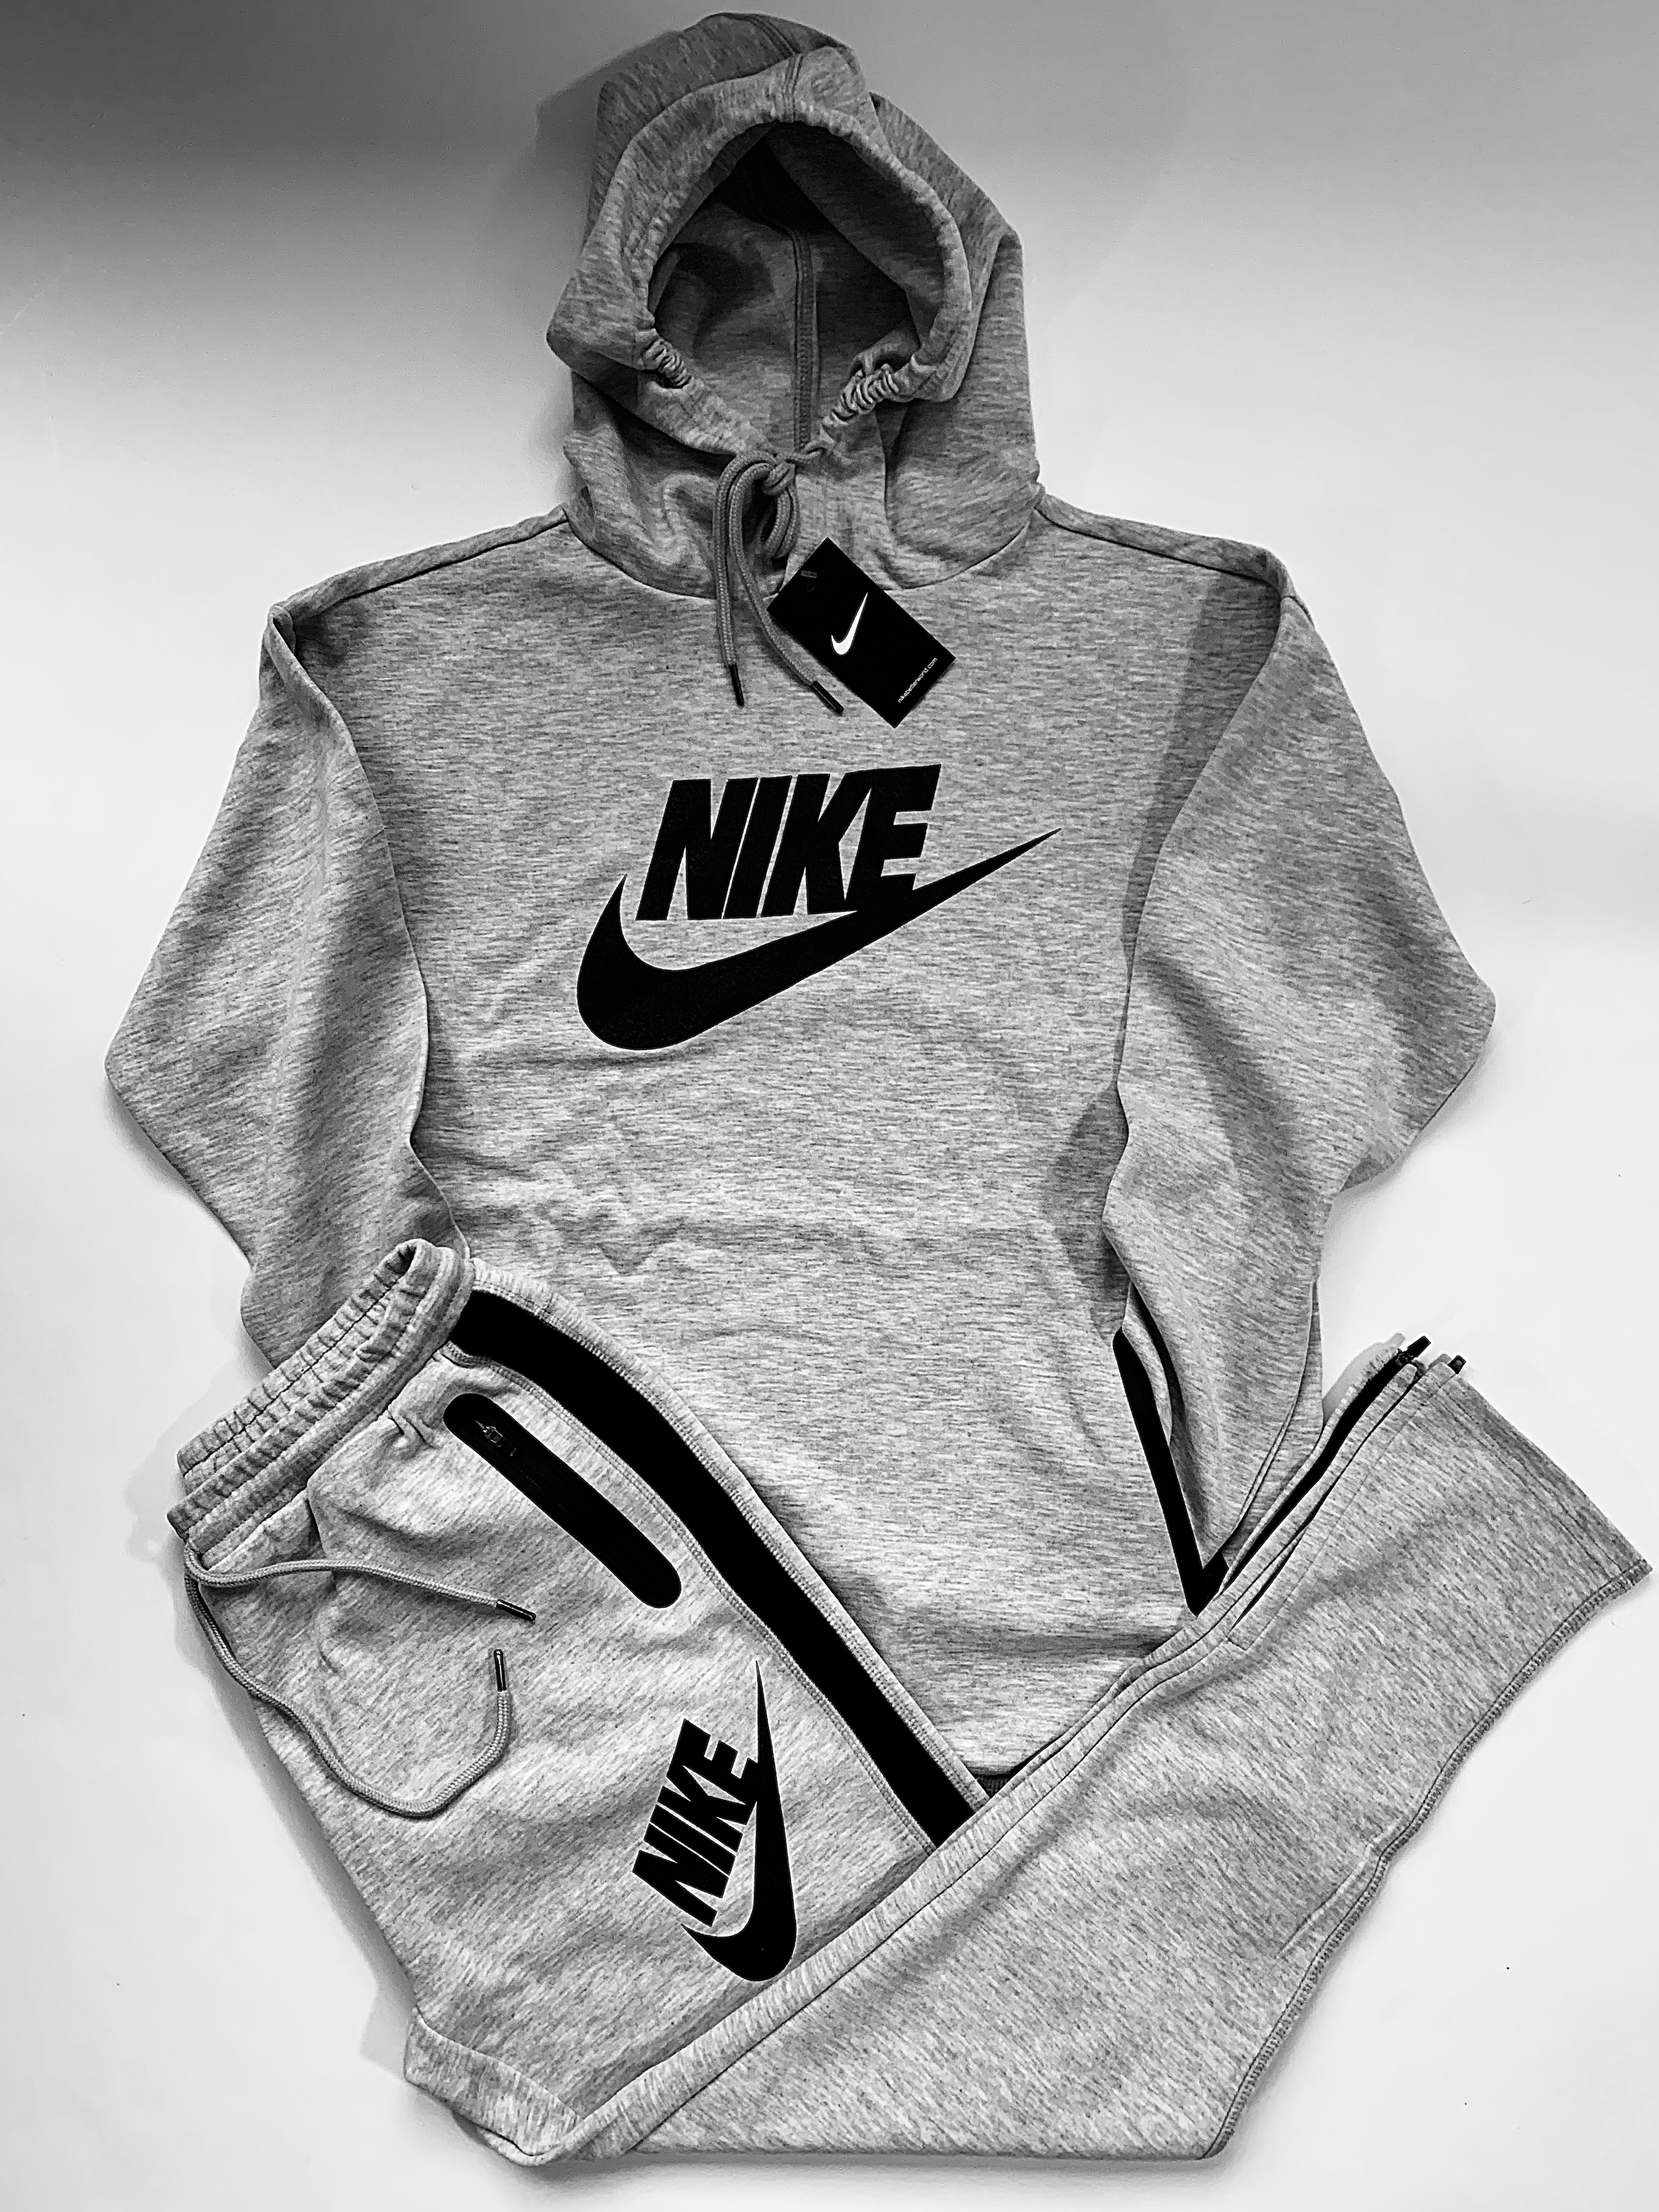 new nike sweat suits mens